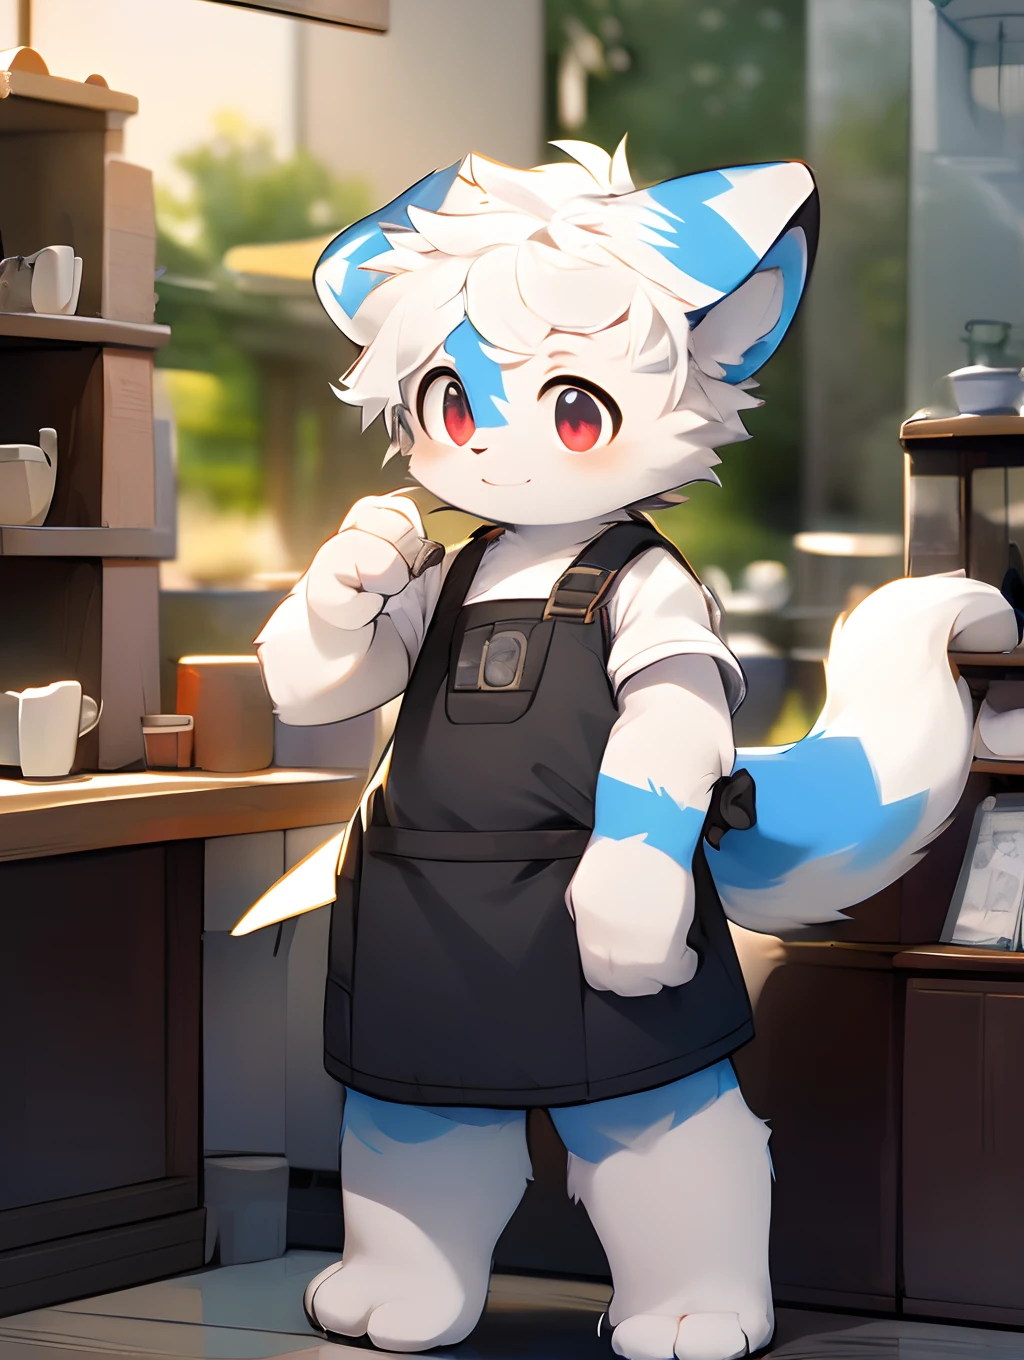 (light blue furs， Detailed fur， red eyes， White hair)， adolable， standing on your feet， Master masterpieces， A high resolution， 8k， detailedbackground， high qulity， Libido boy， male people， solo， aprons ，Cafe，ssmile，solo person，solo